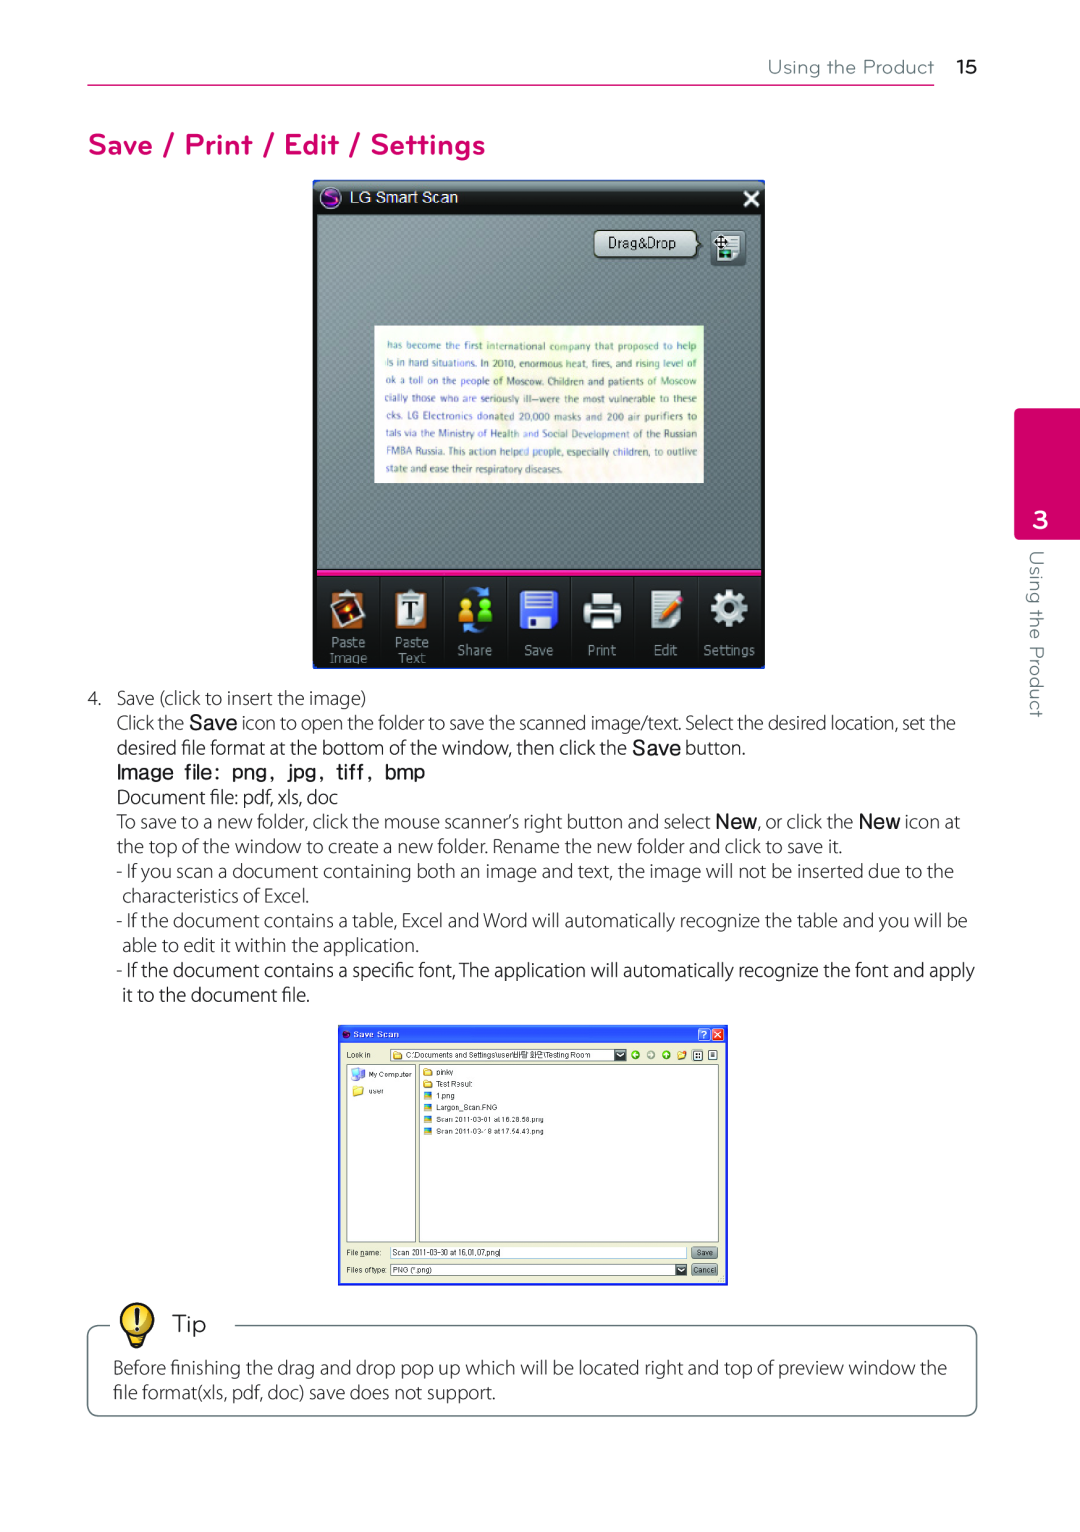 LG Electronics LSM-100 owner manual Save / Print / Edit / Settings, Using the Product, does 